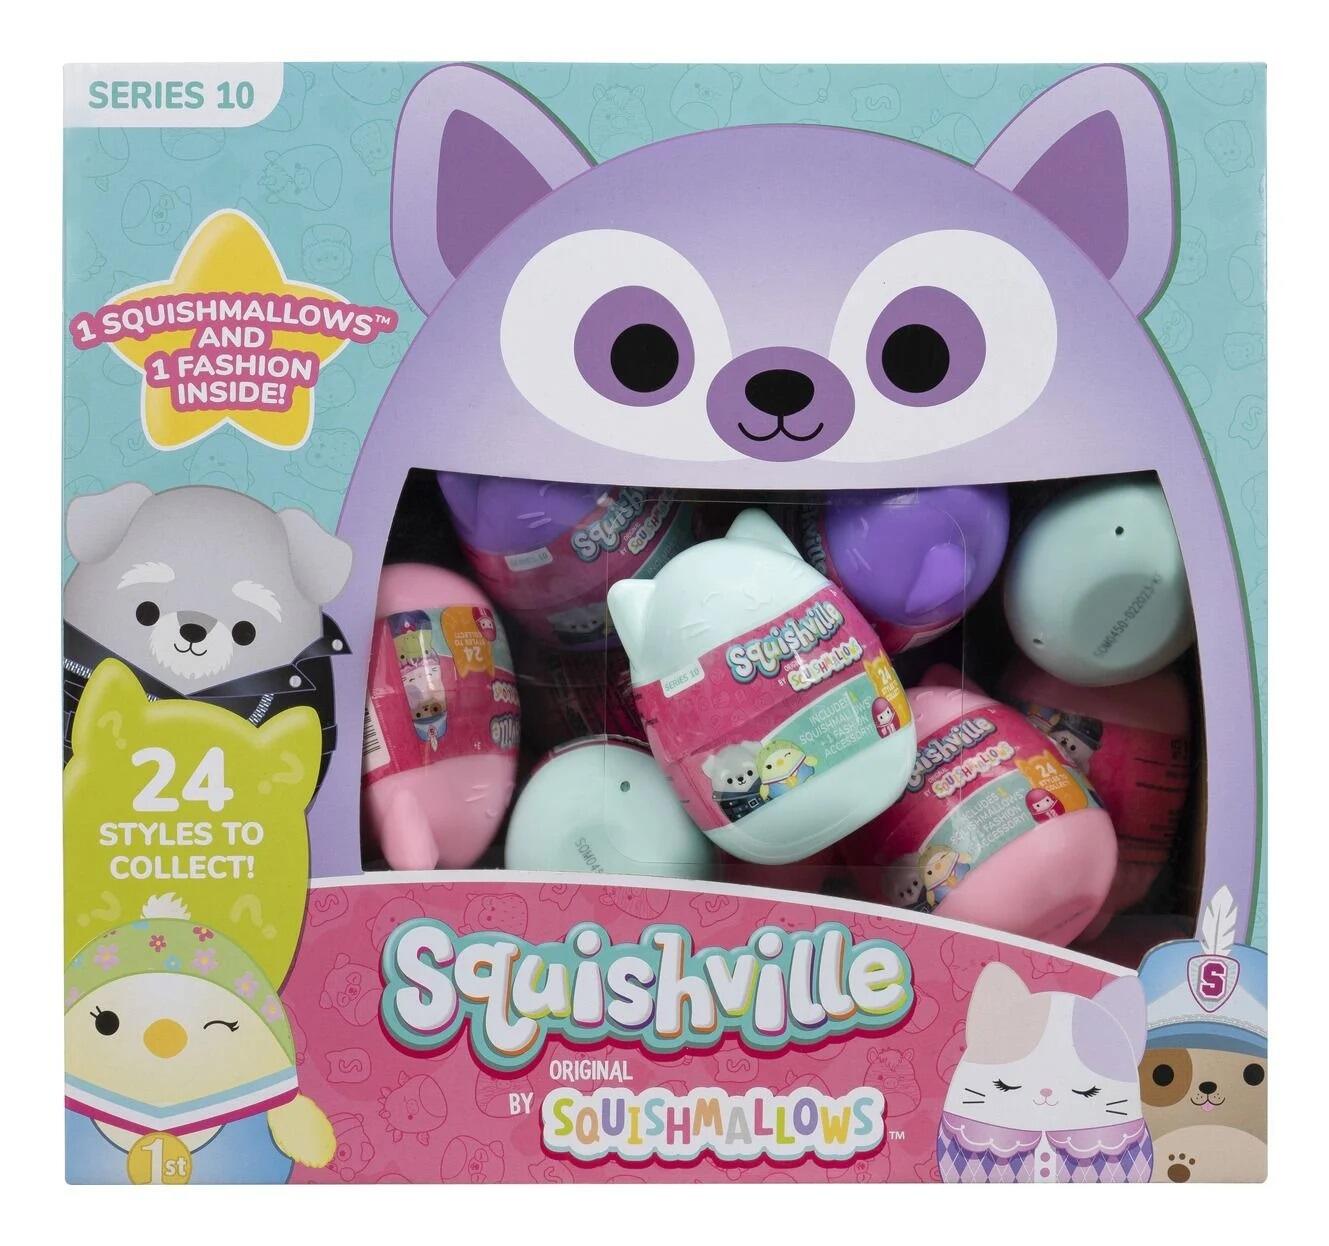  Squishmallow Squishville Mystery Mini Series 1 Plush Assortment  Blind Package - 1 Blind Pack : Toys & Games